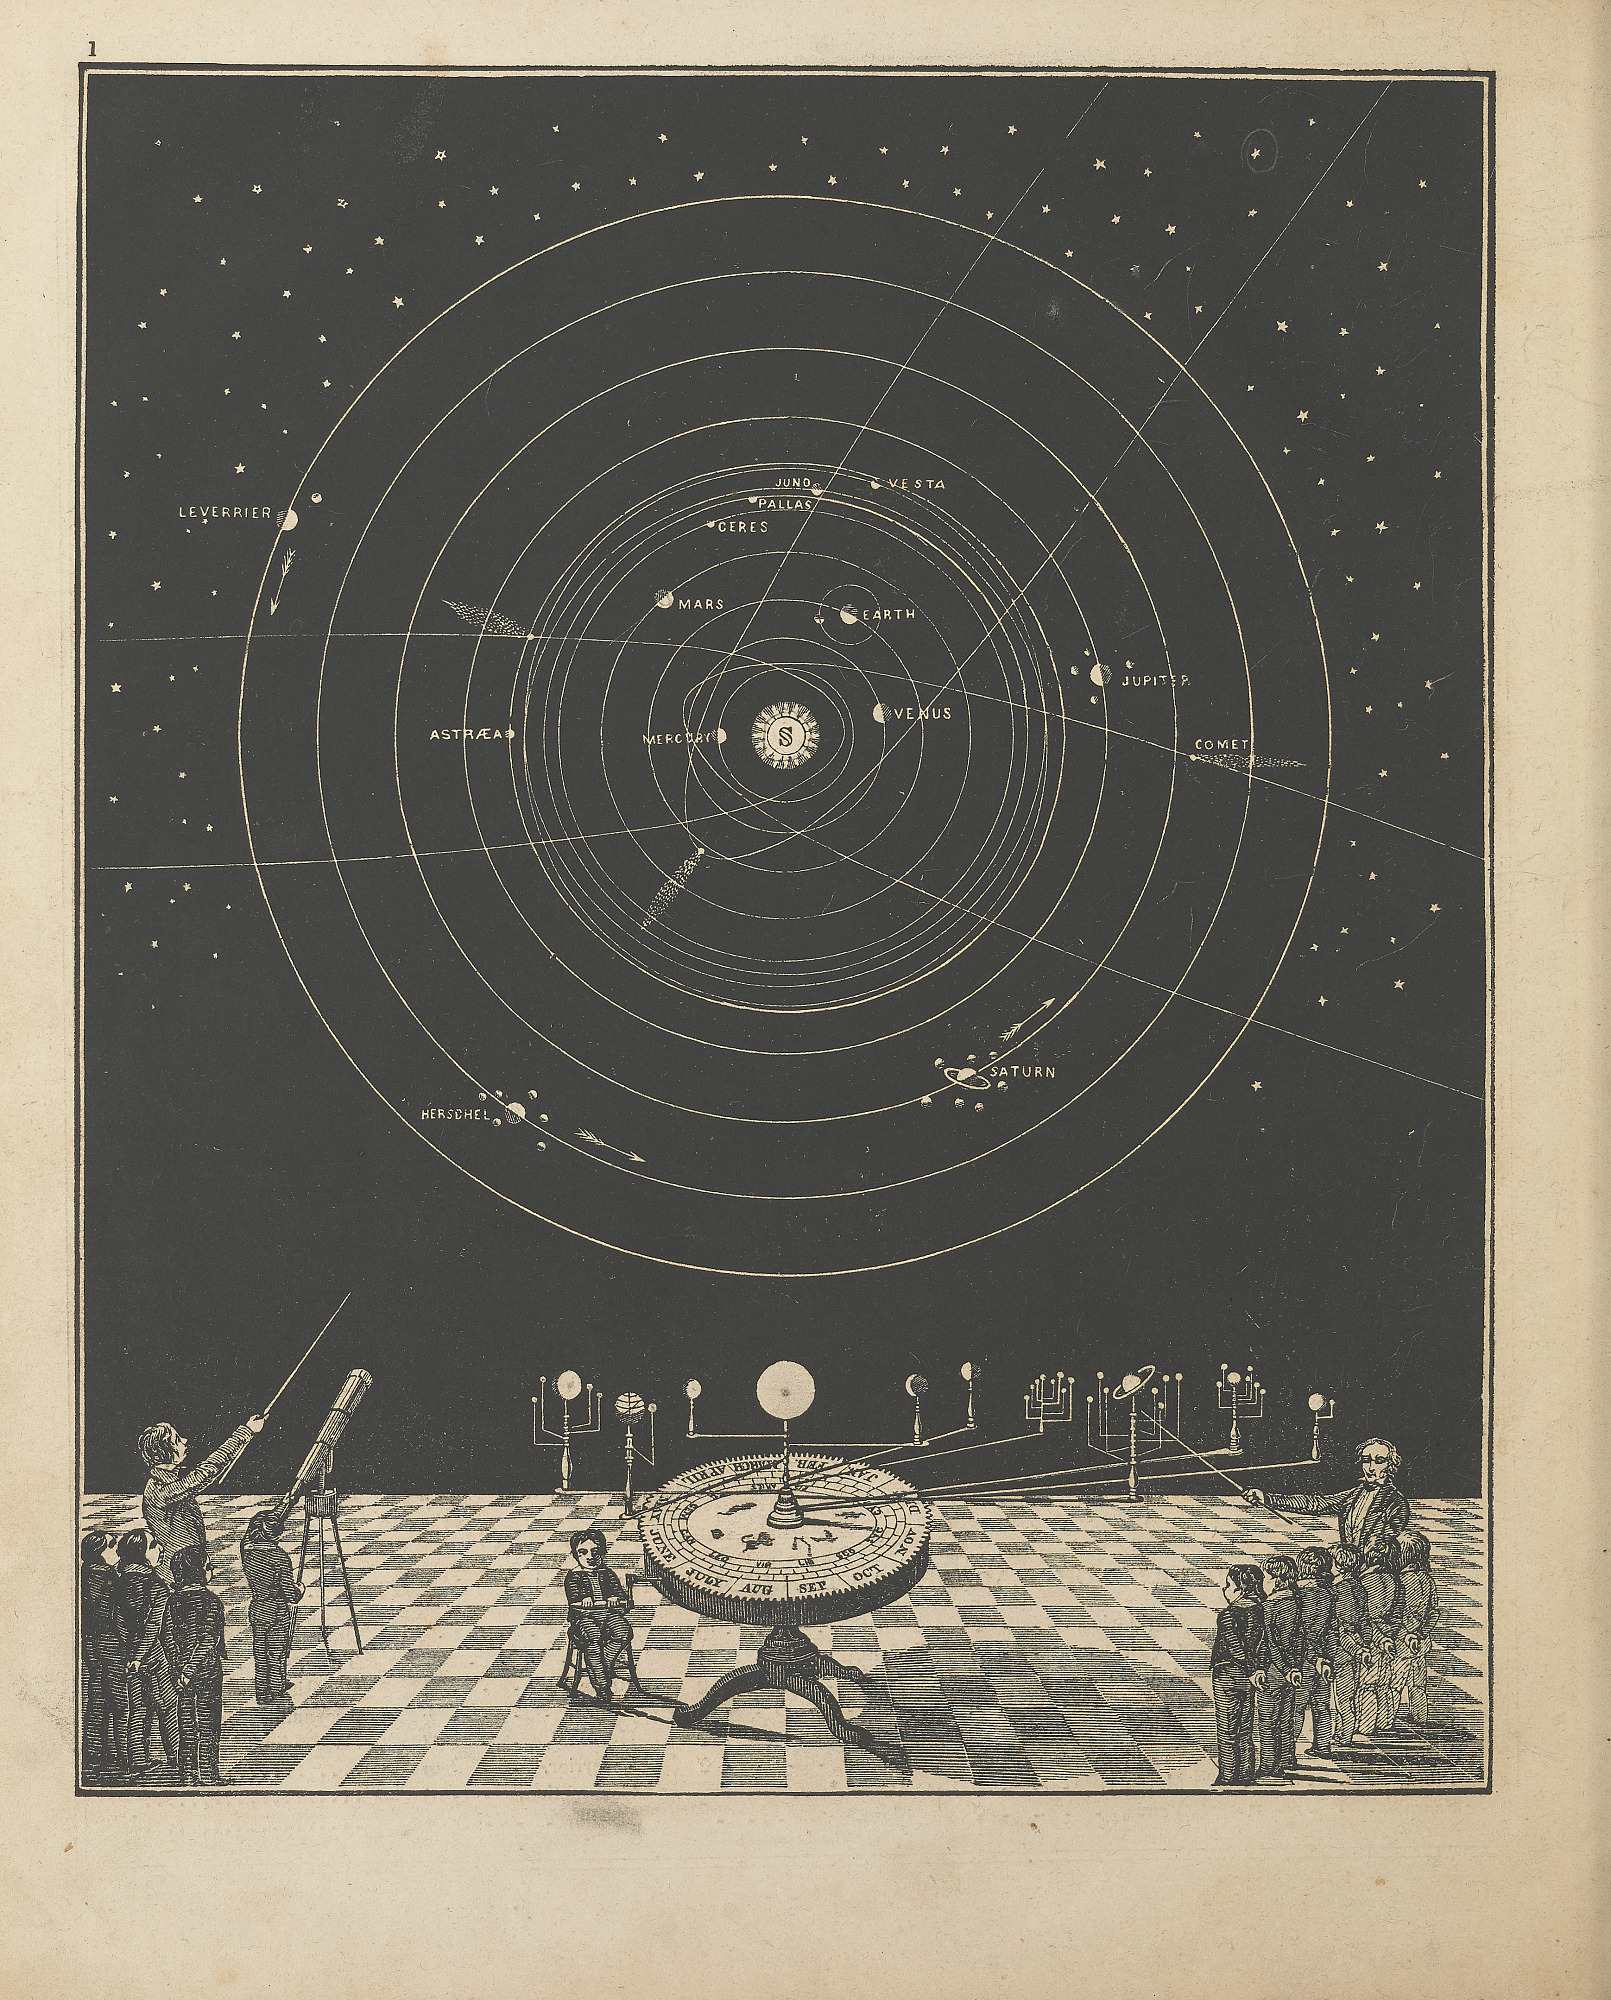 Illustration of the solar system. Below, two men hold pointers toward it and a 3D model, while a group of young people look on. One person looks through a telescope.